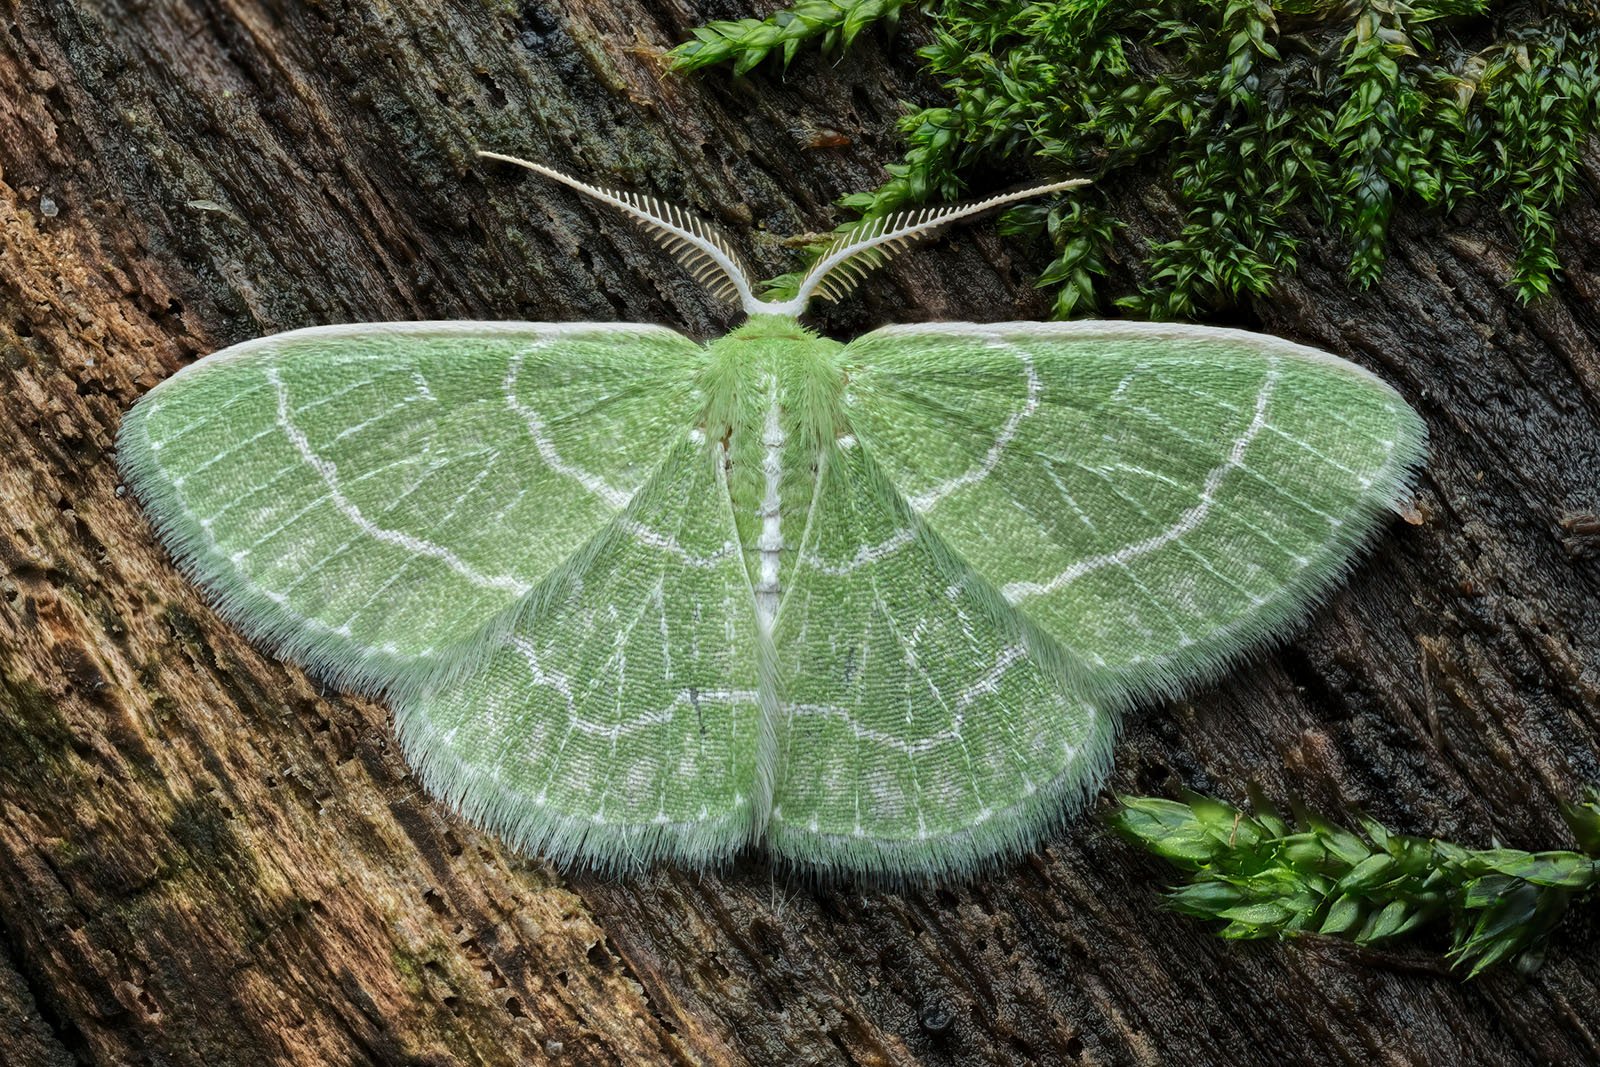 A close-up image of a lime-green moth with delicate white lines and markings on its wings. The moth is resting on a textured wooden surface with small patches of green moss. The intricate patterns on its wings blend harmoniously with its natural surroundings.